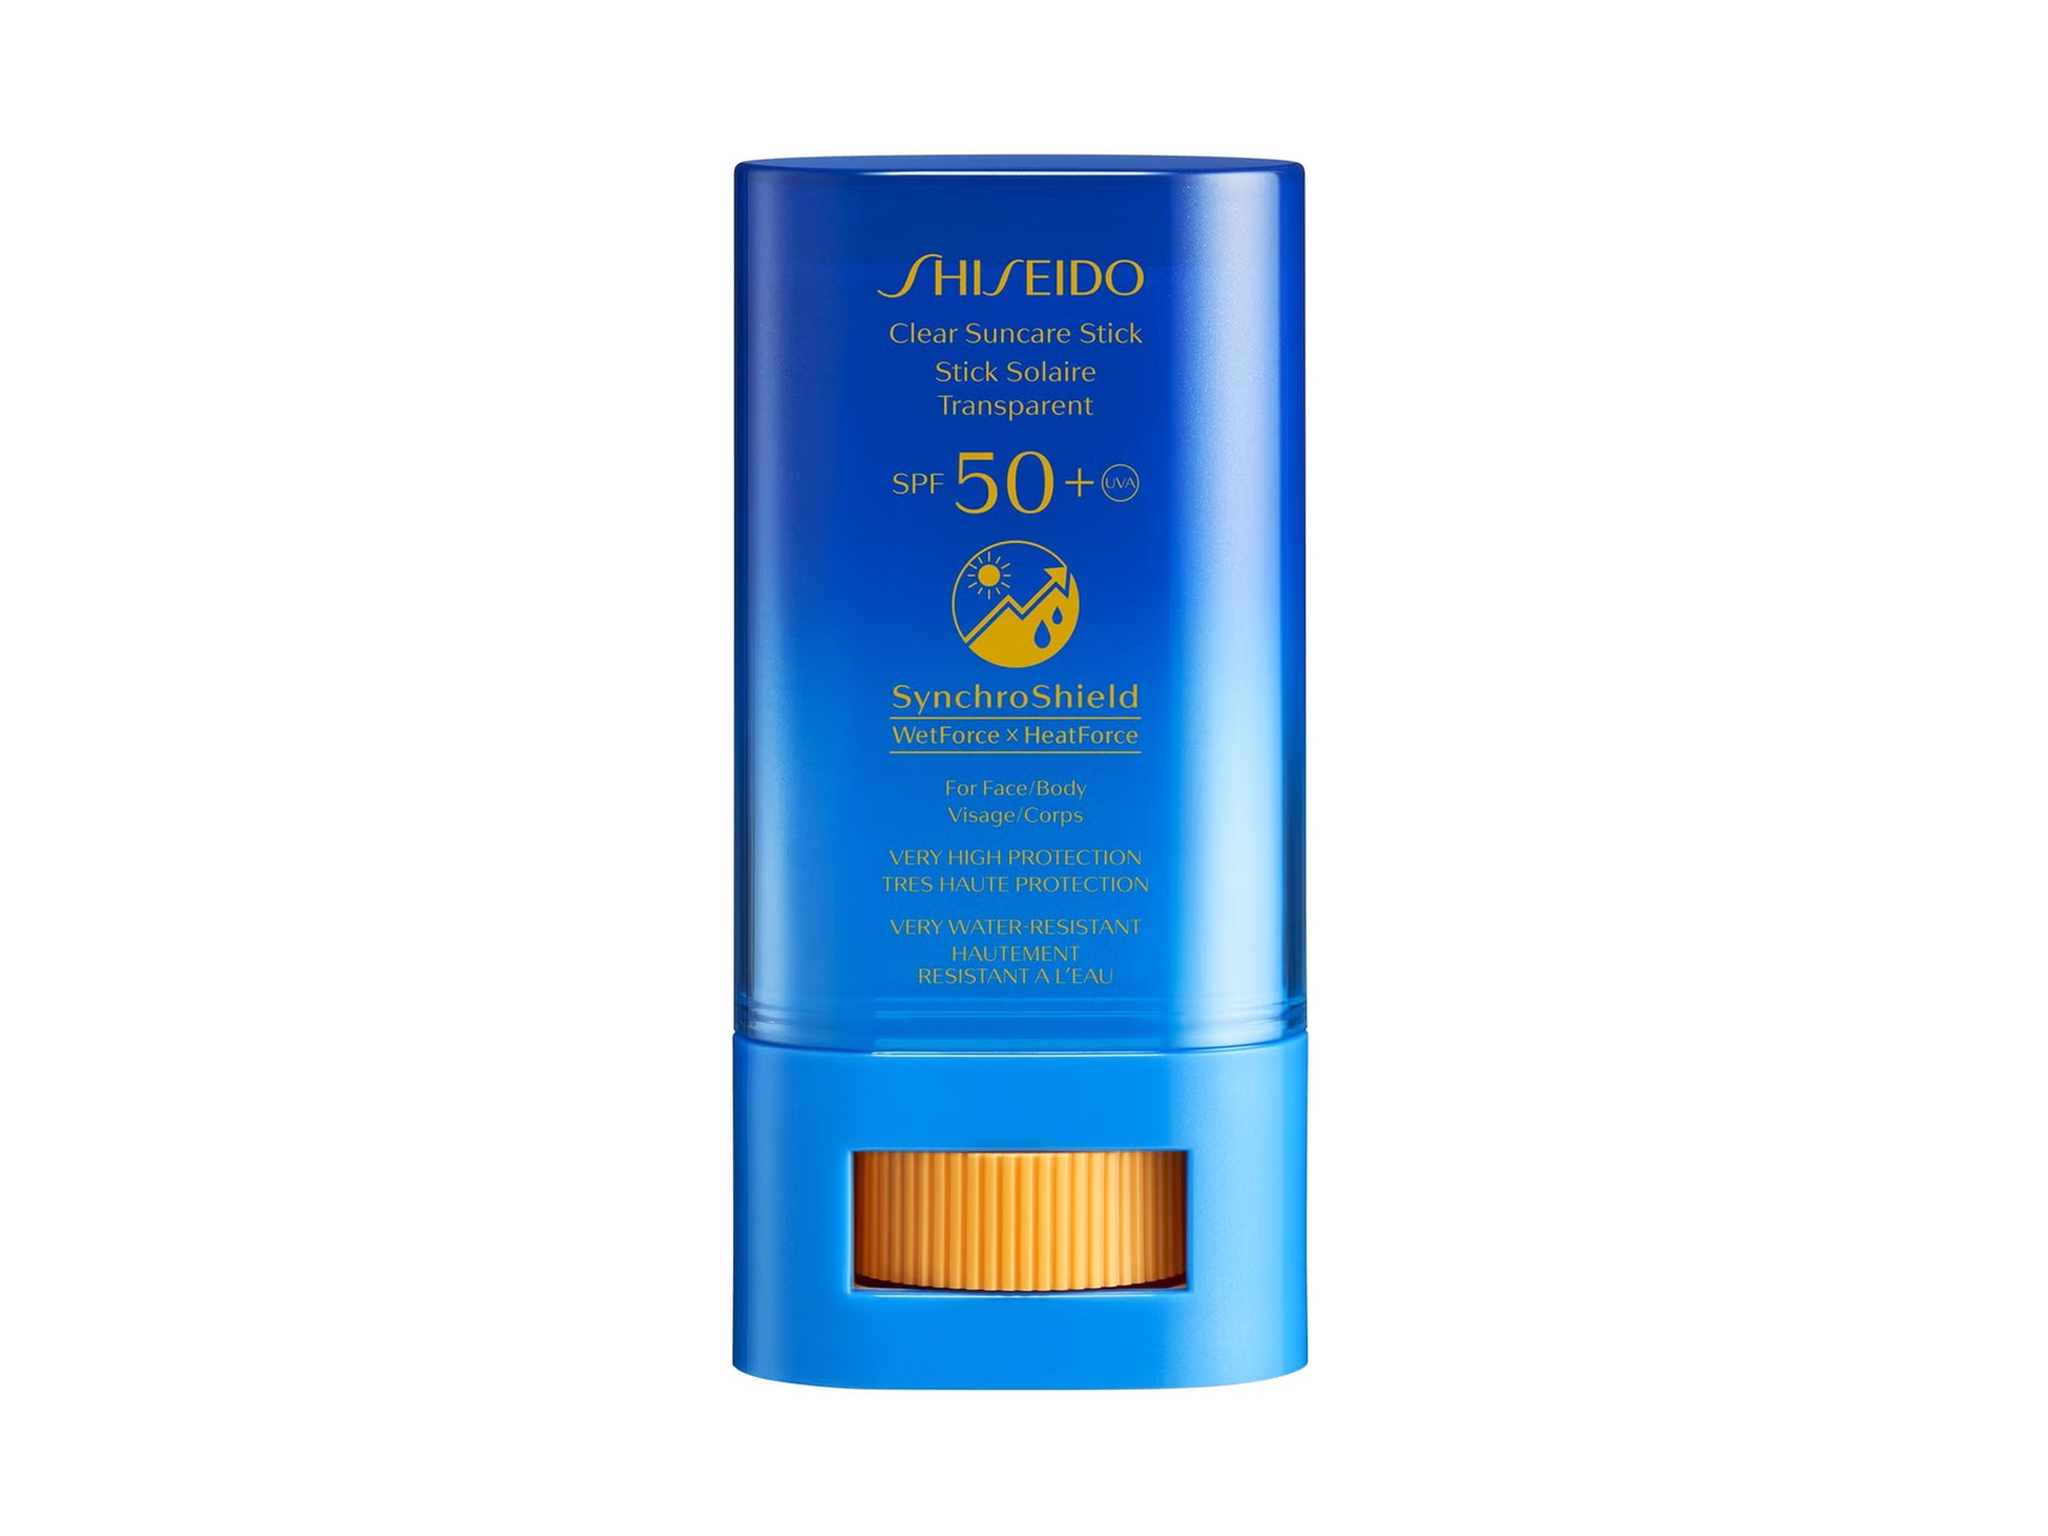 shiseido-sunscreen-stick-review-indybest